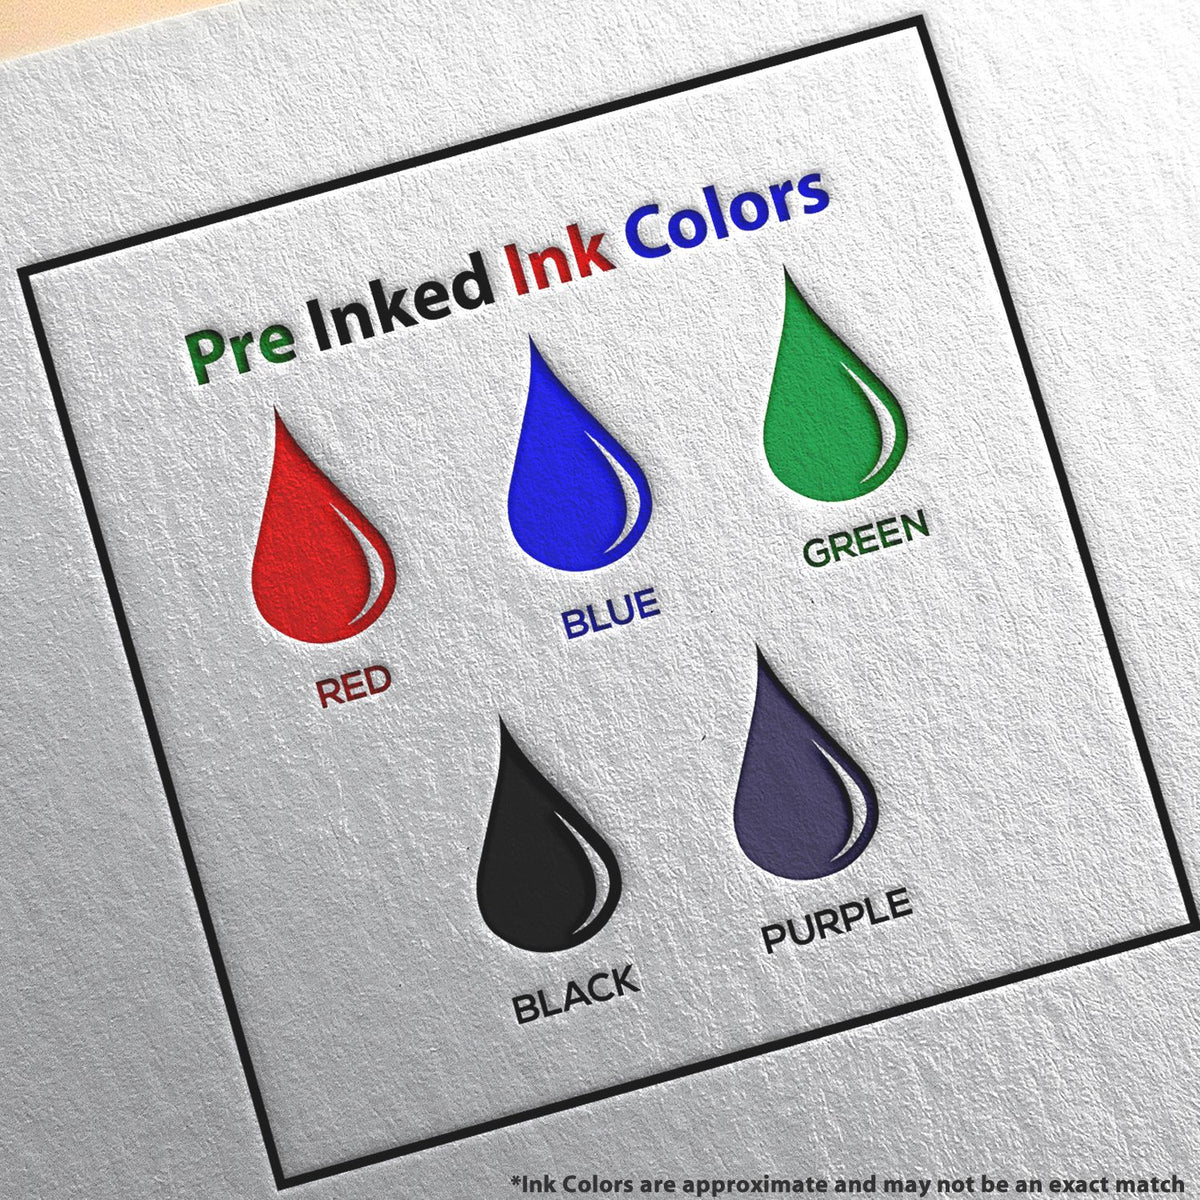 A picture showing the different ink colors or hues available for the PSI Michigan Notary Stamp product.